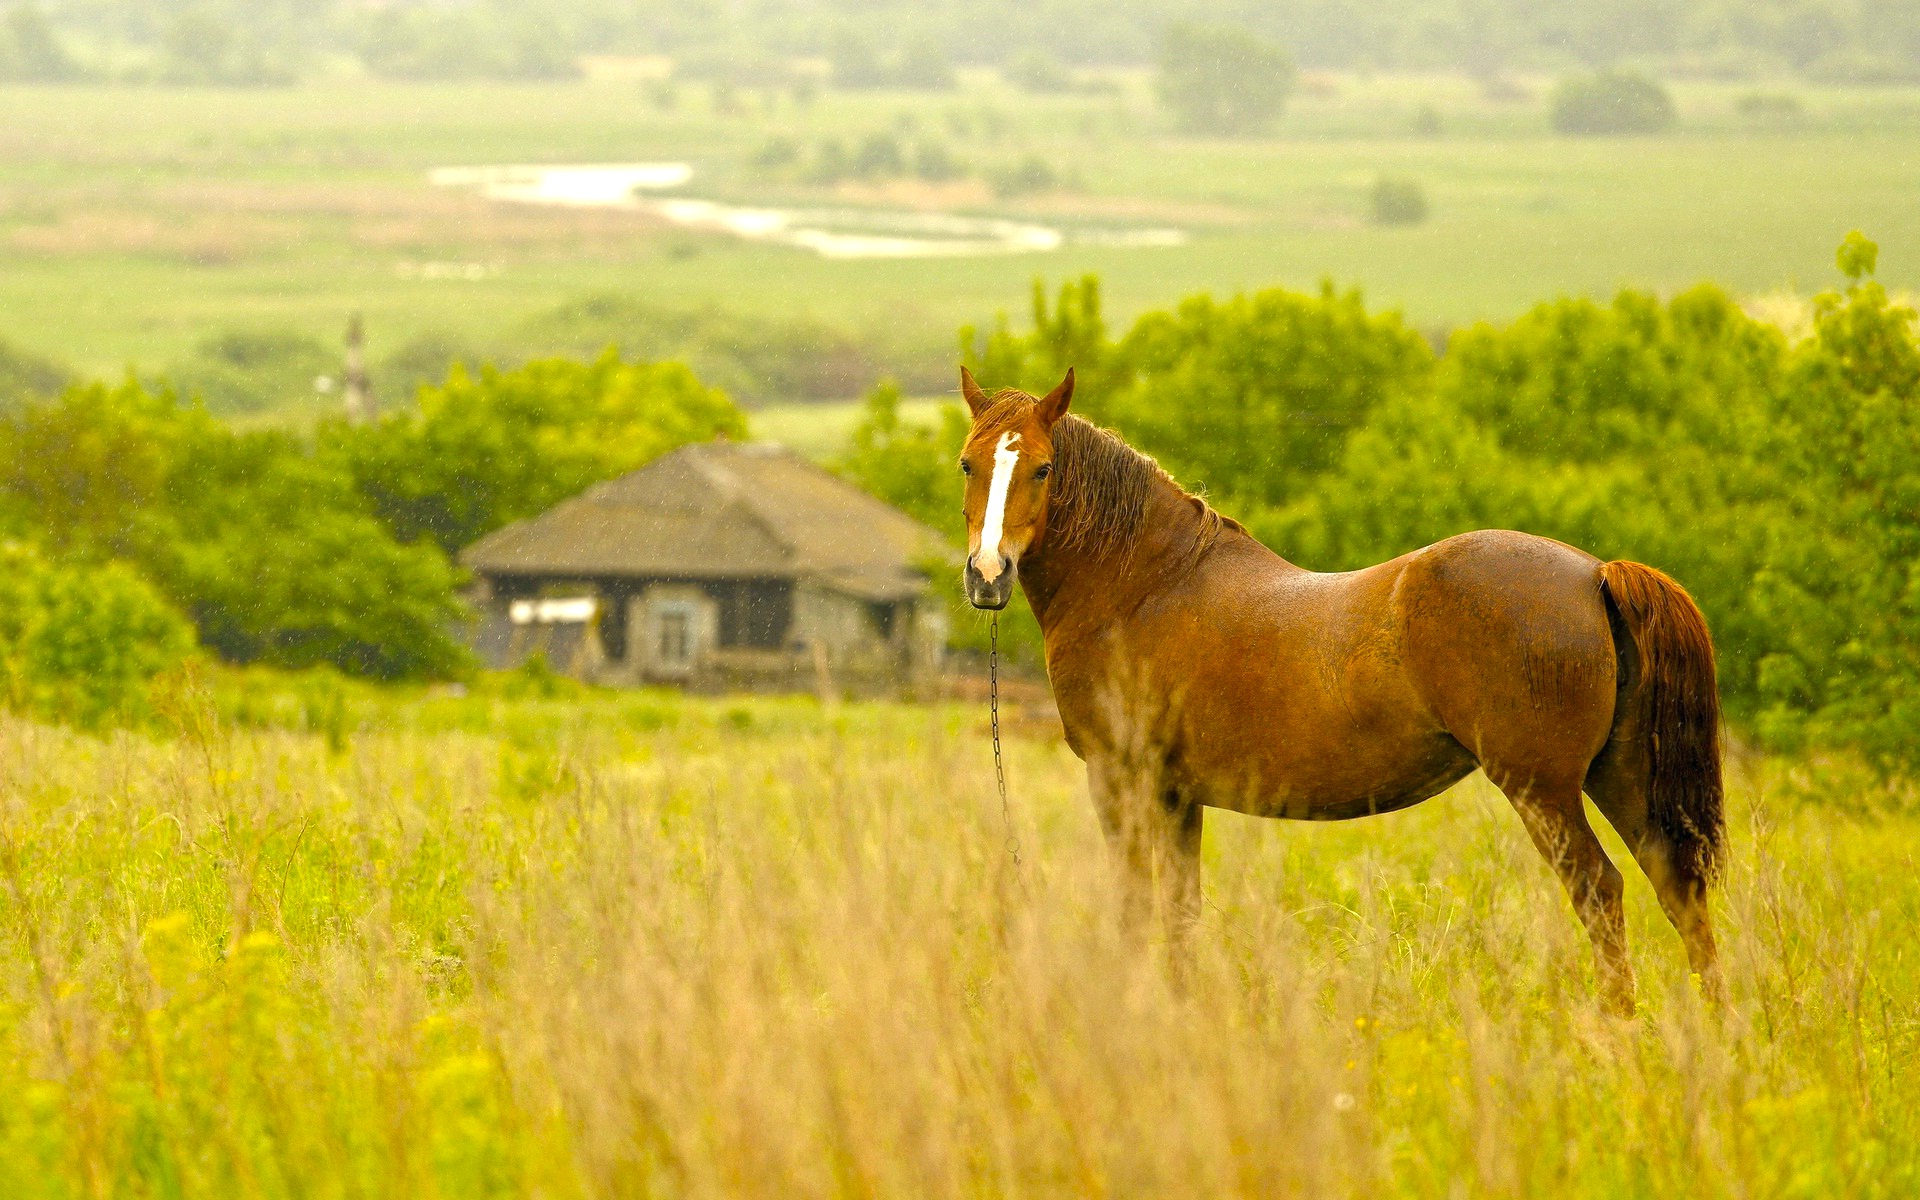 Horse Animal Facts With Image Wallpaper For Desktop HD